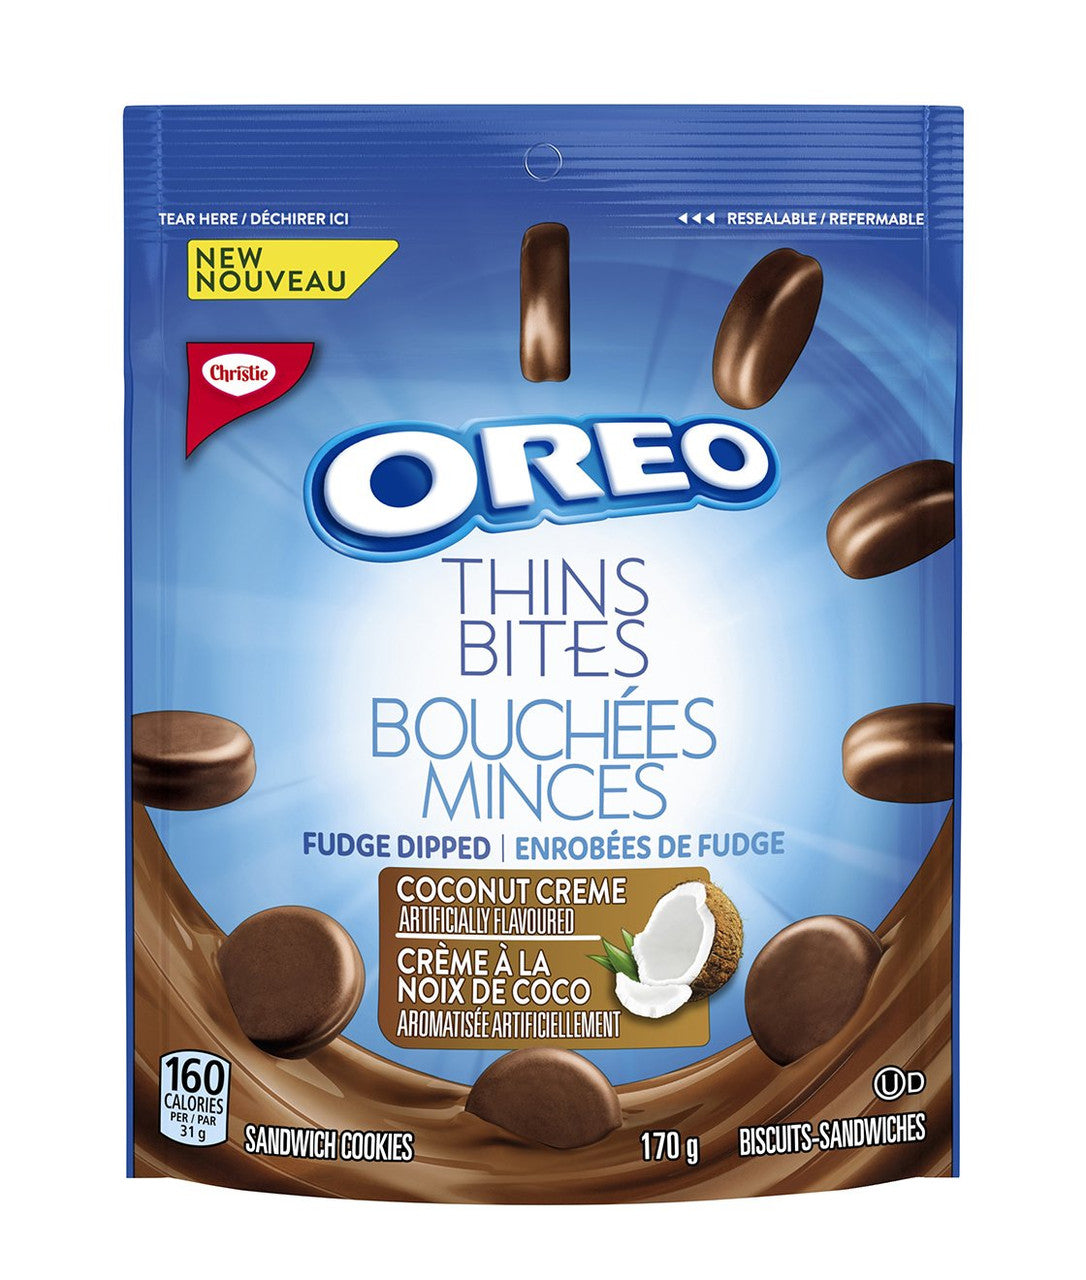 Christie Oreo Thins Bites, Coconut, 170g Imported from Canada